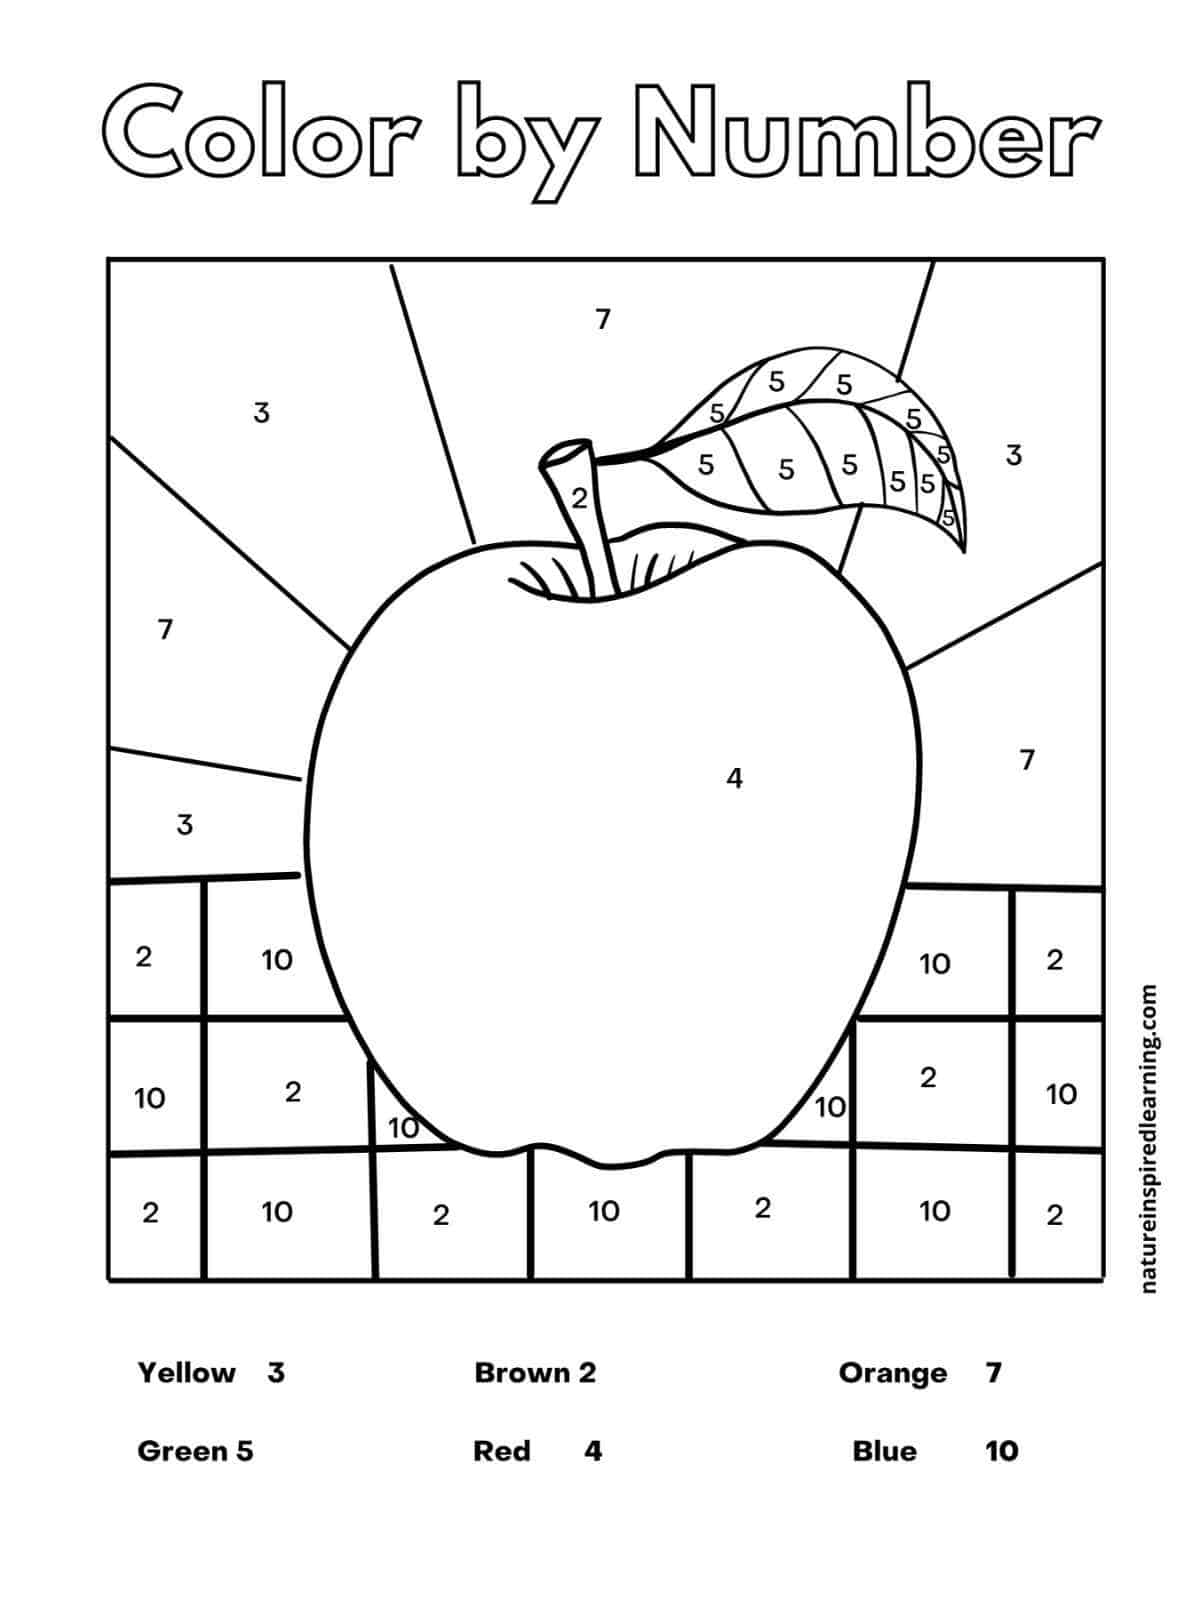 Black and white worksheet with a large apple with a leaf in the middle of a square with diagonal lines and a square grid with little numbers in the image. Color key at bottom with Color by Number at top in outline form